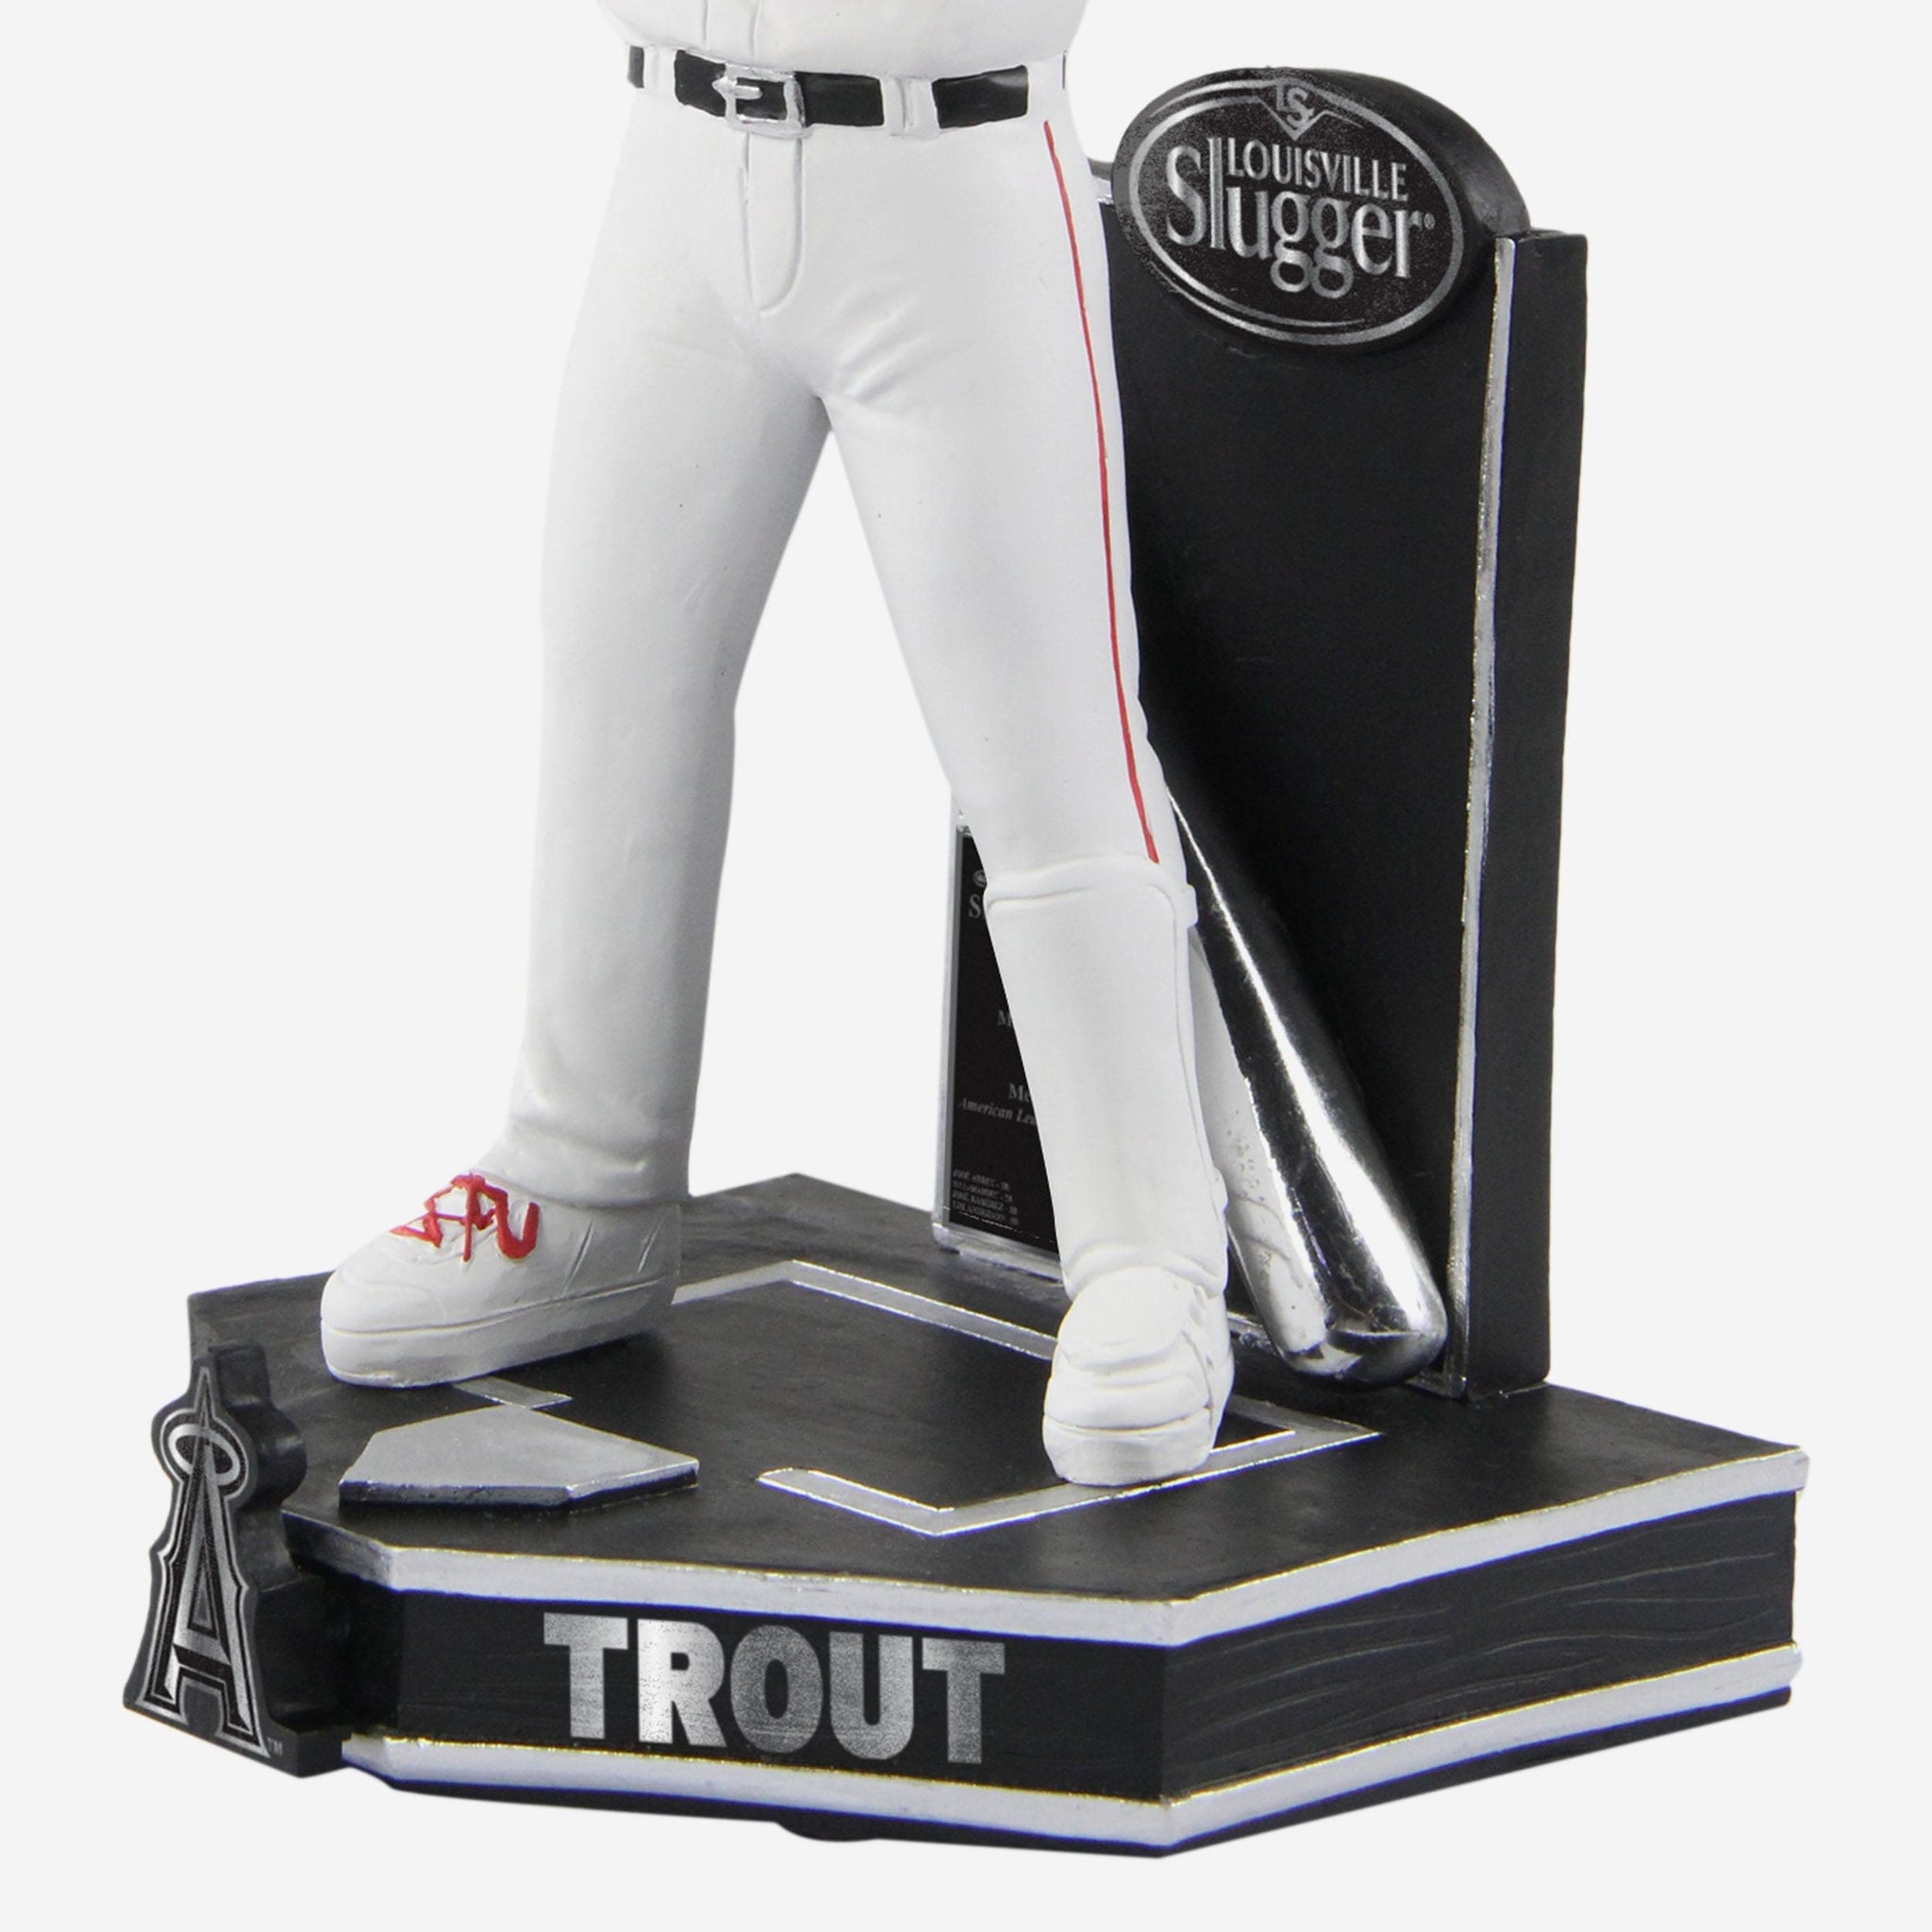 Mike Trout Los Angeles Angels #27 Highlight Series Bobblehead FOCO